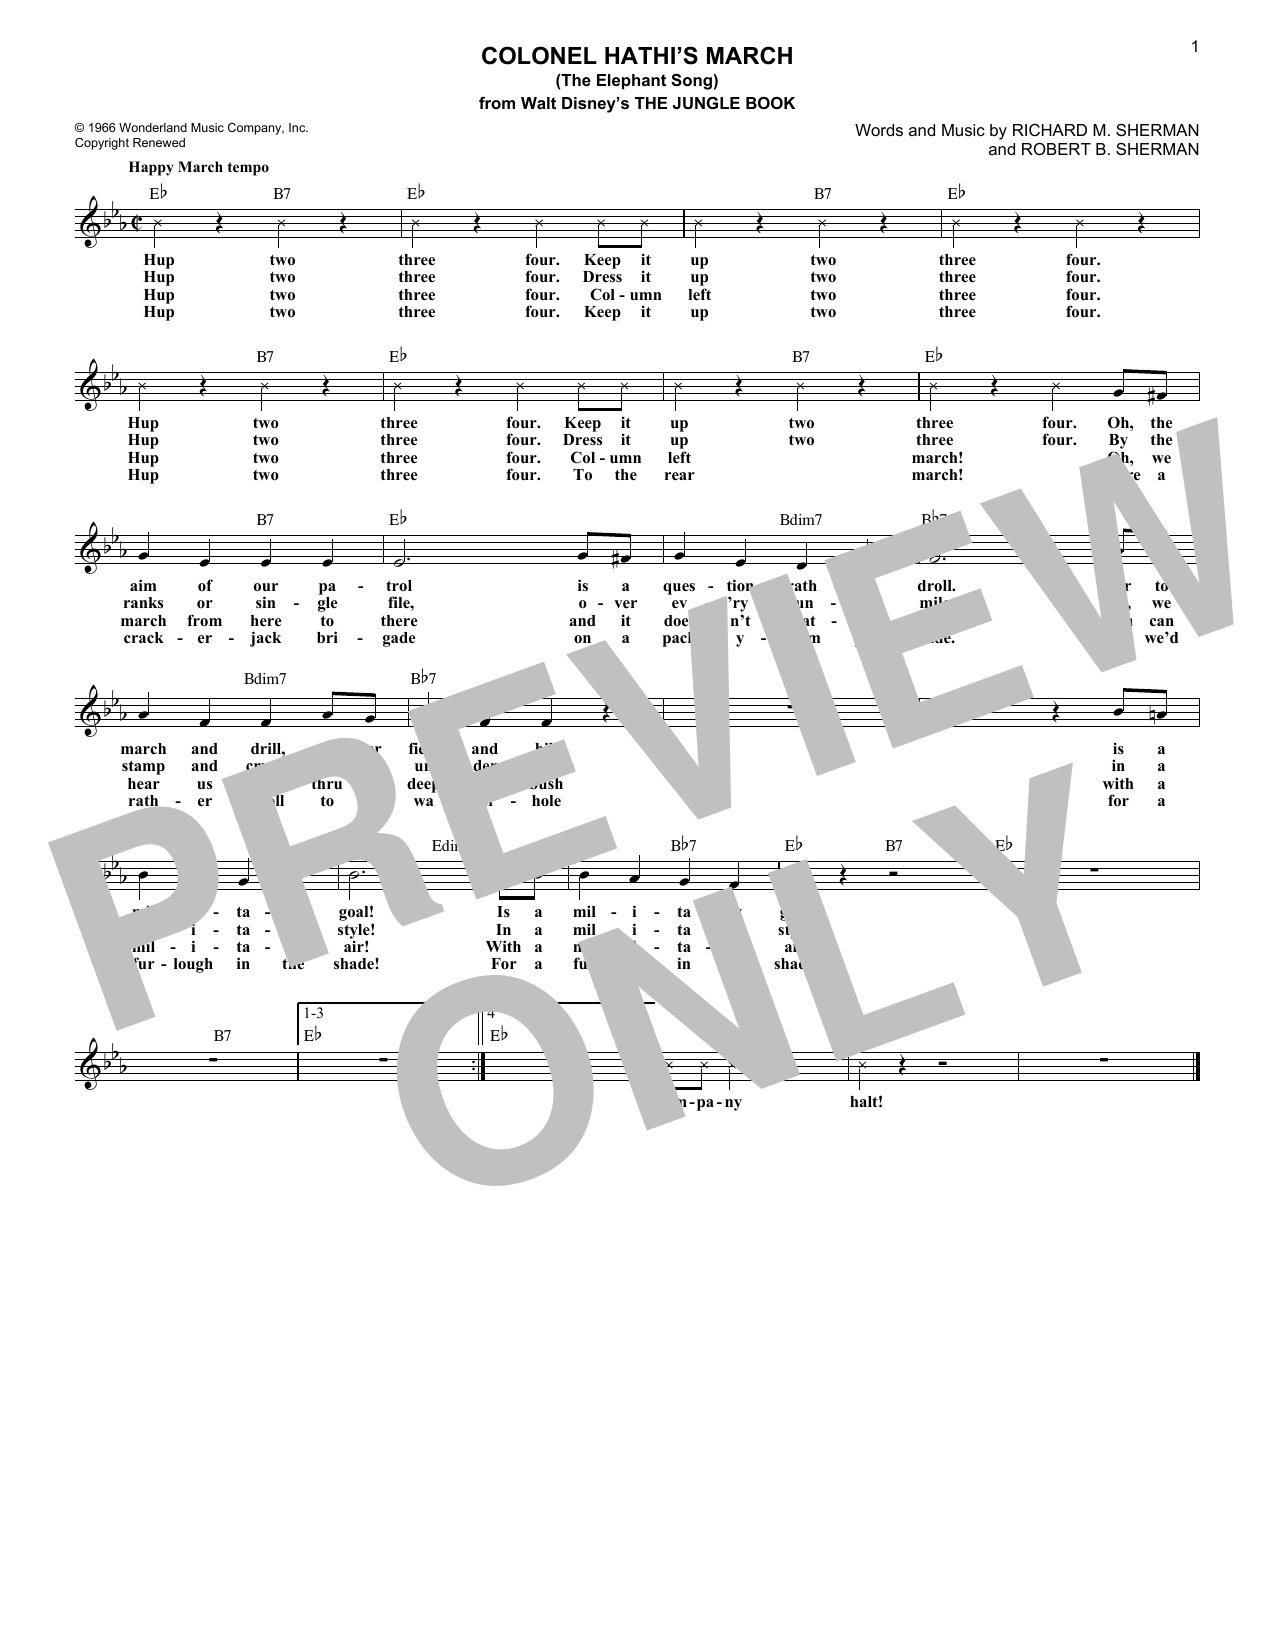 Download Richard M. Sherman Colonel Hathi's March (The Elephant Son Sheet Music